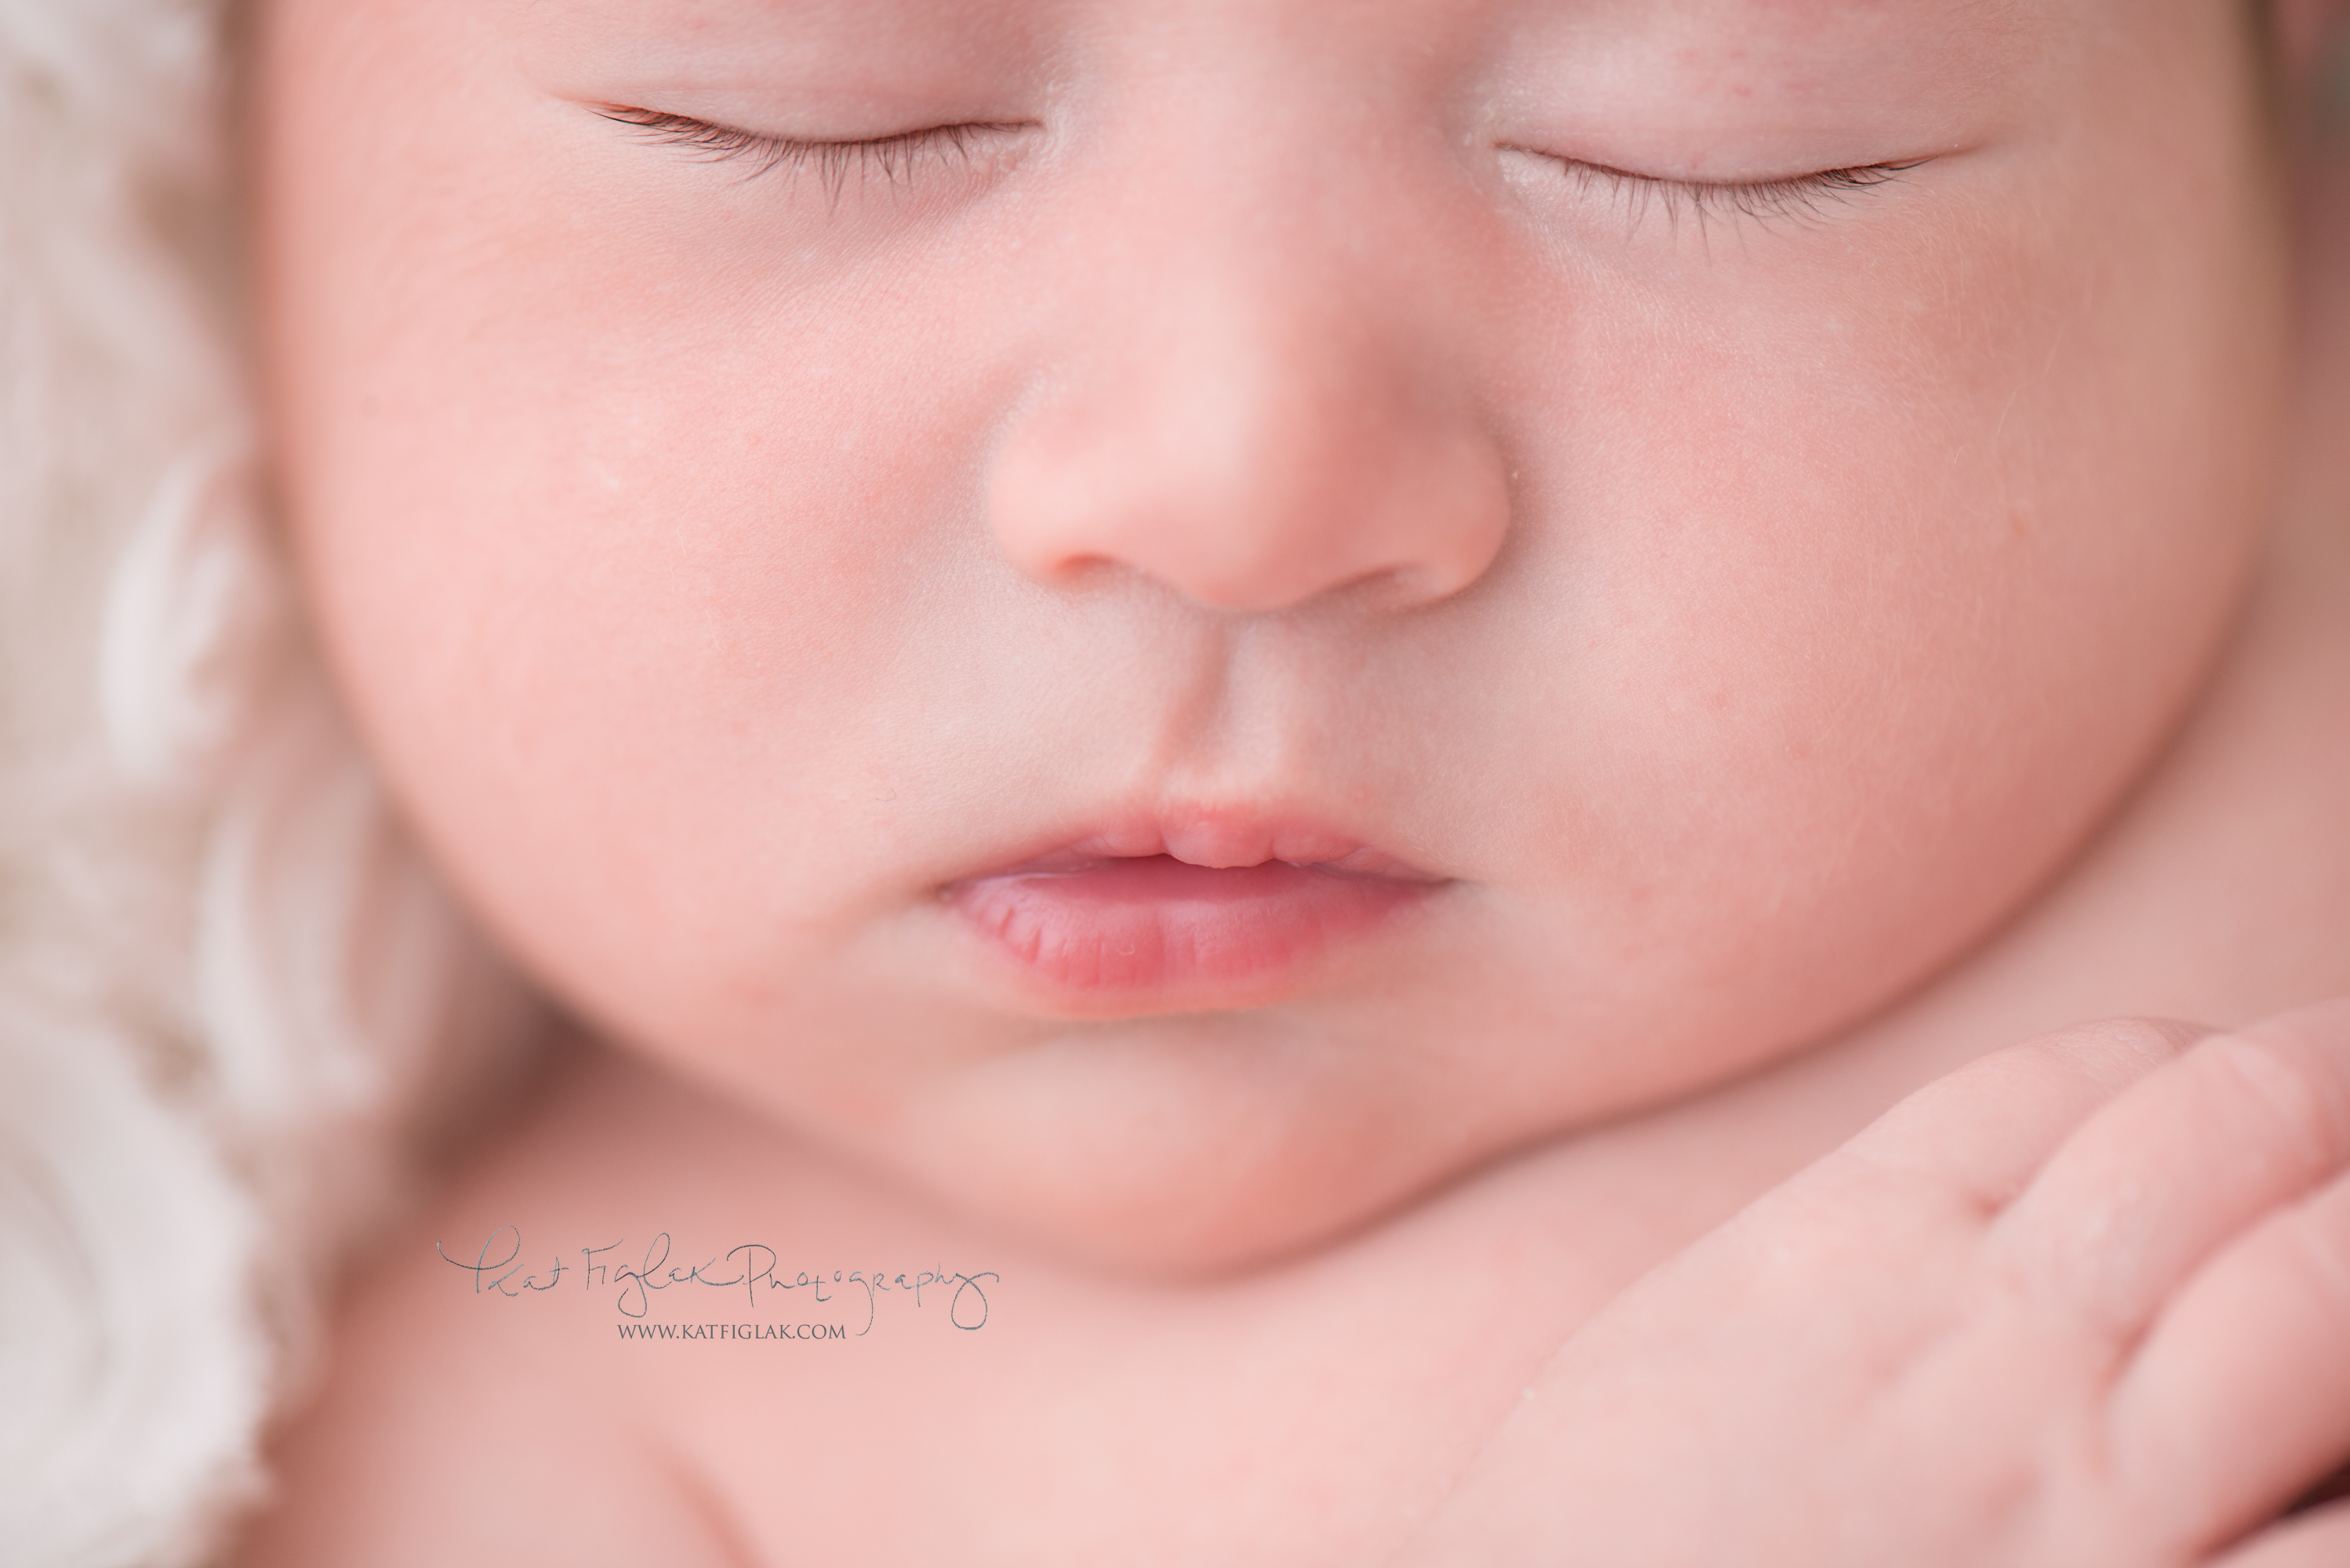 Detail shot of baby's lips nose and eyelashes